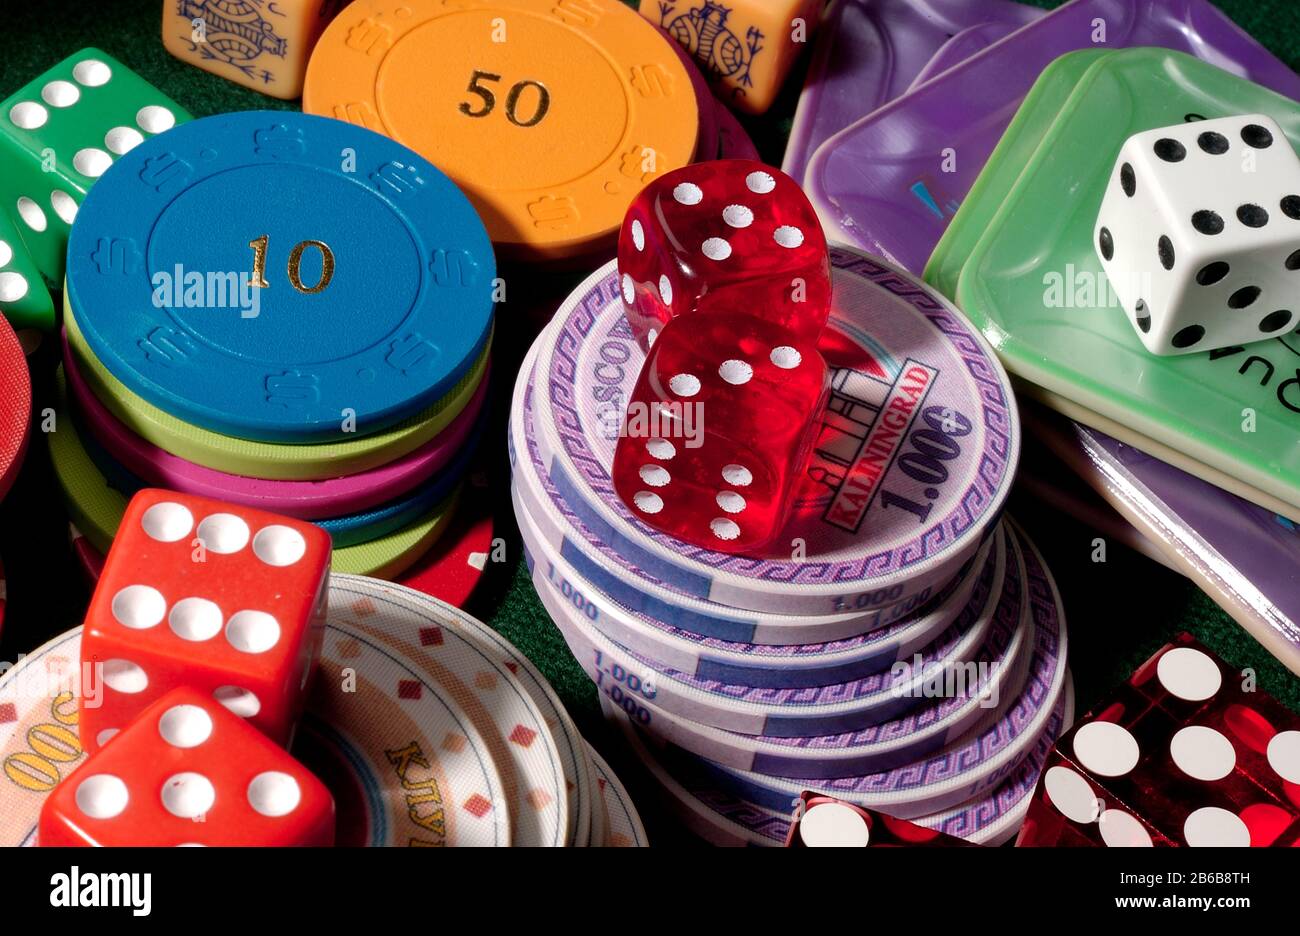 A collection of gambling chips, counters, dice and poker dice. Risk and reward. Stock Photo